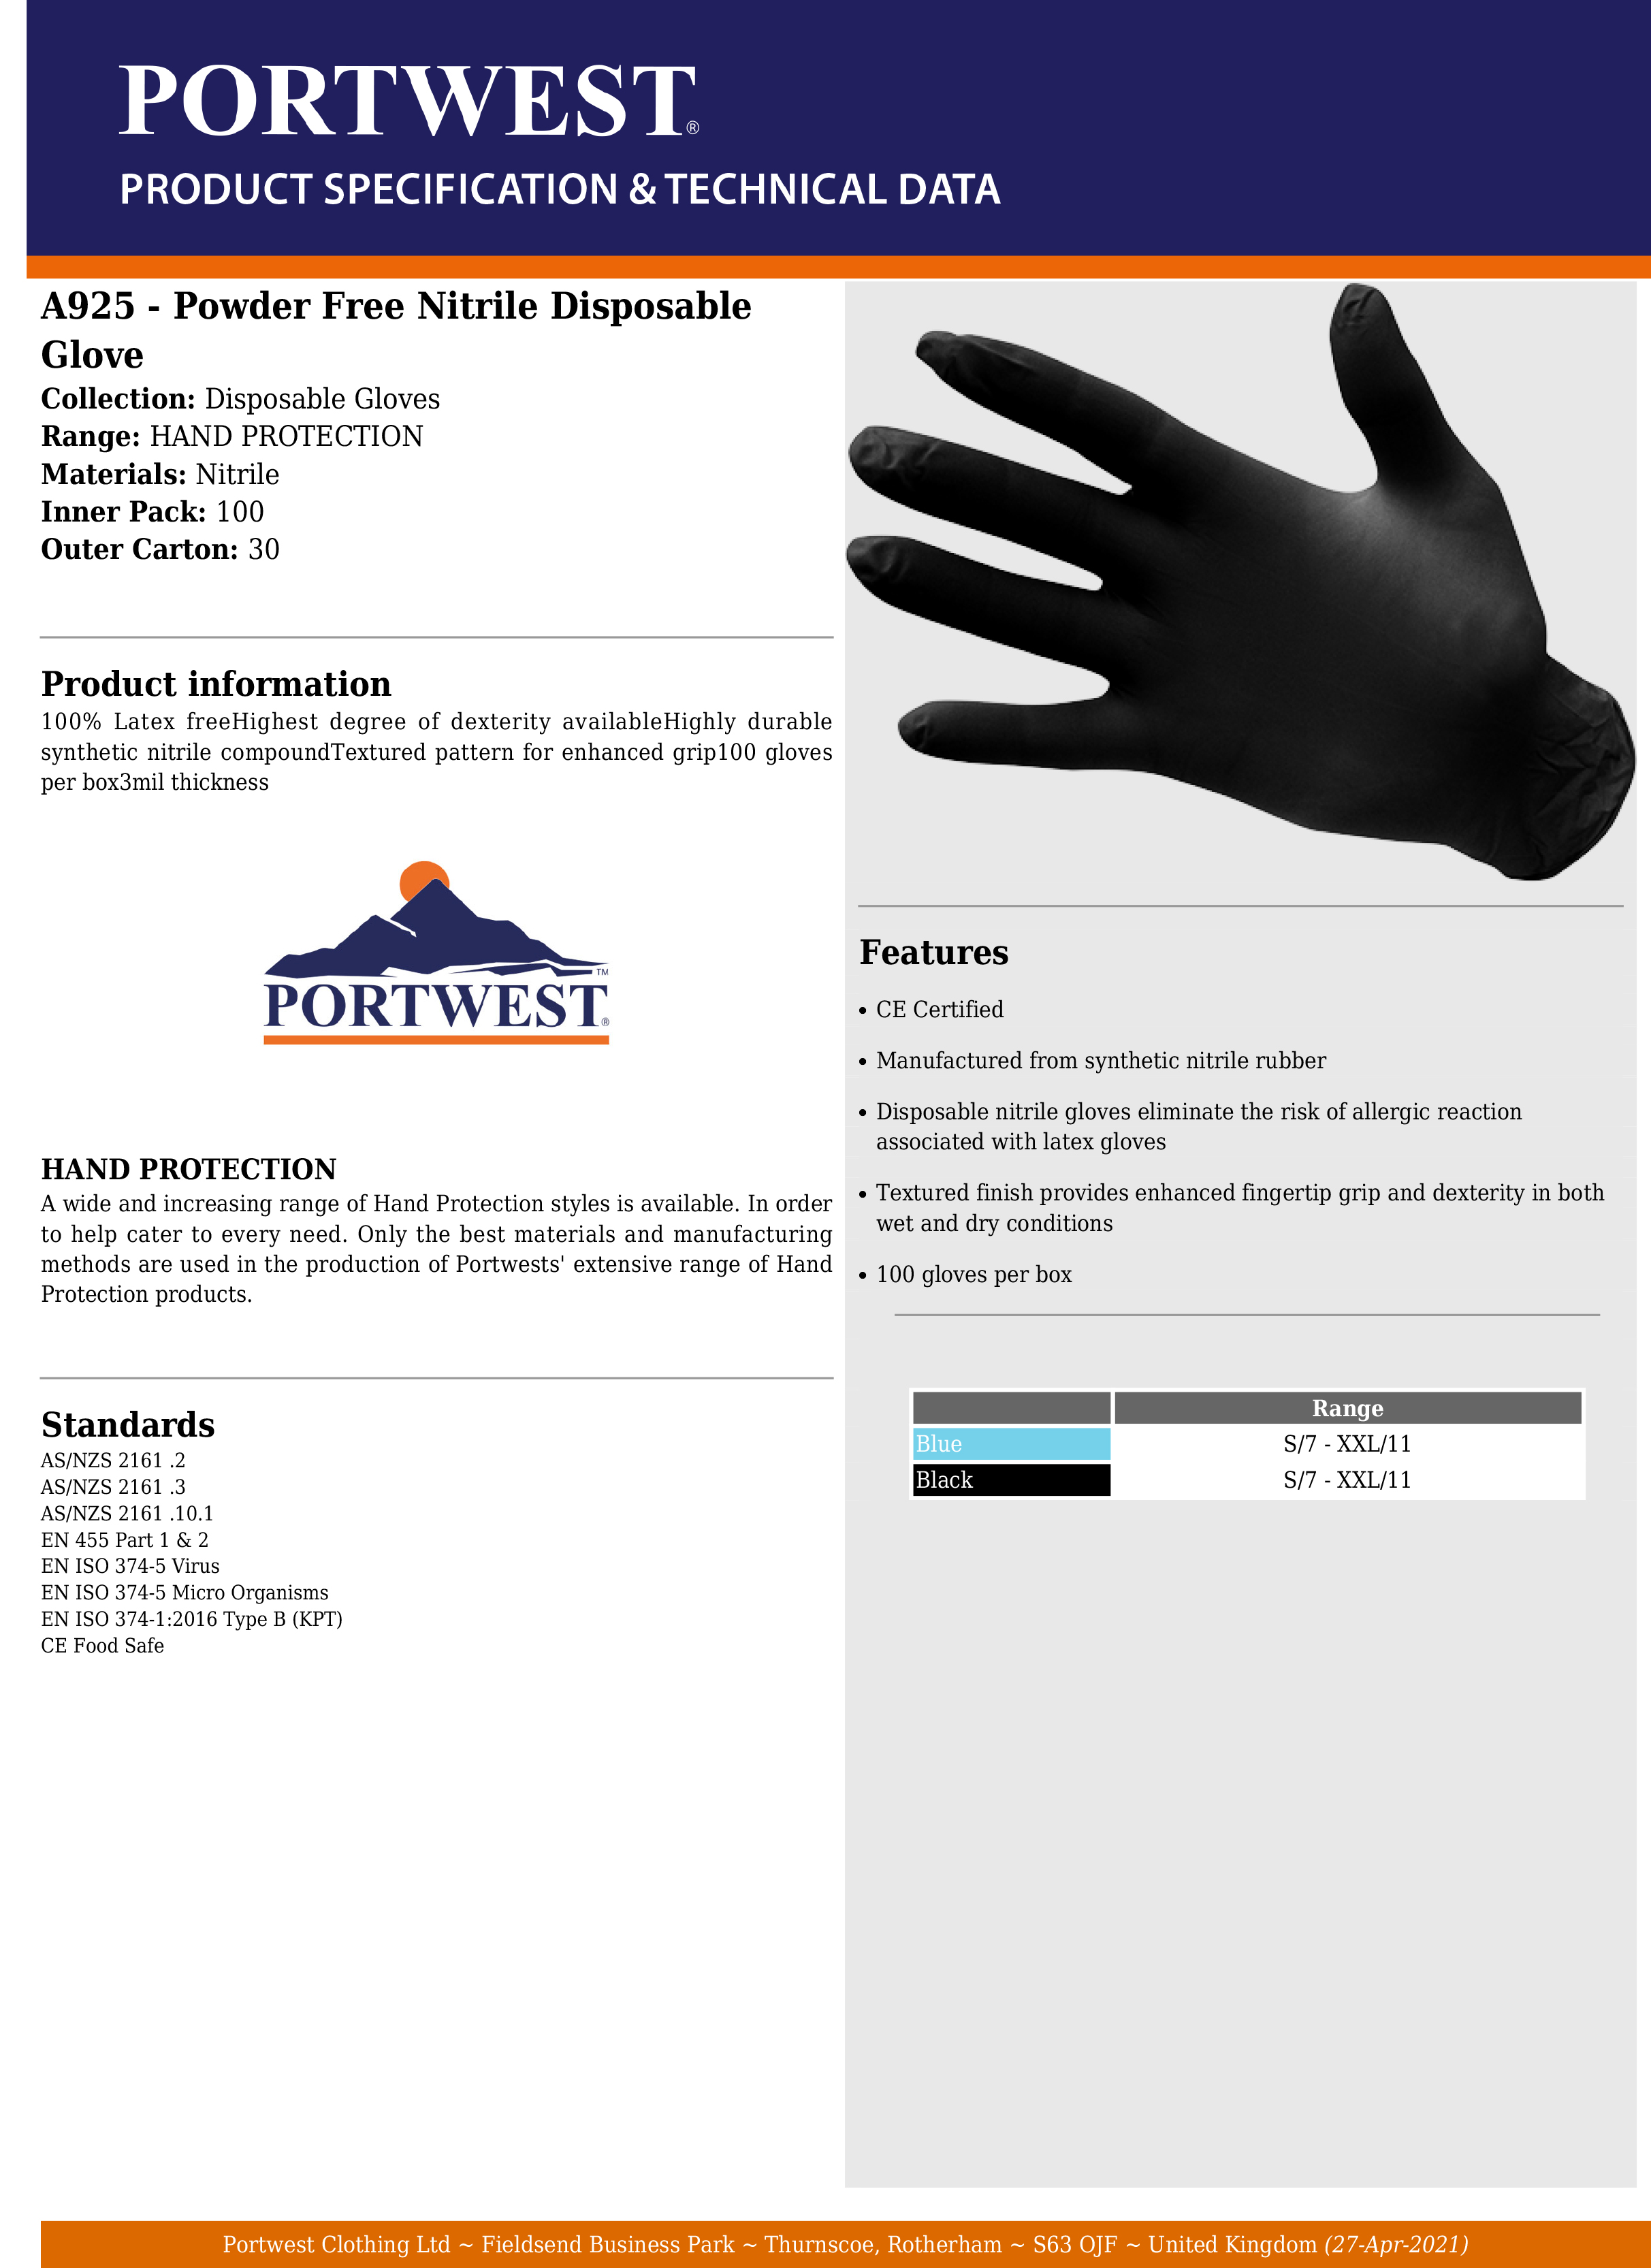 - Black Disposable Gloves Powder Free Latex Free AQL 1.5 Heavy Work Mechanic Chemical Industry Dish Washing Janitorial Cleaning Nitrile Gloves S 100x Heavy Duty 6mil 6-7